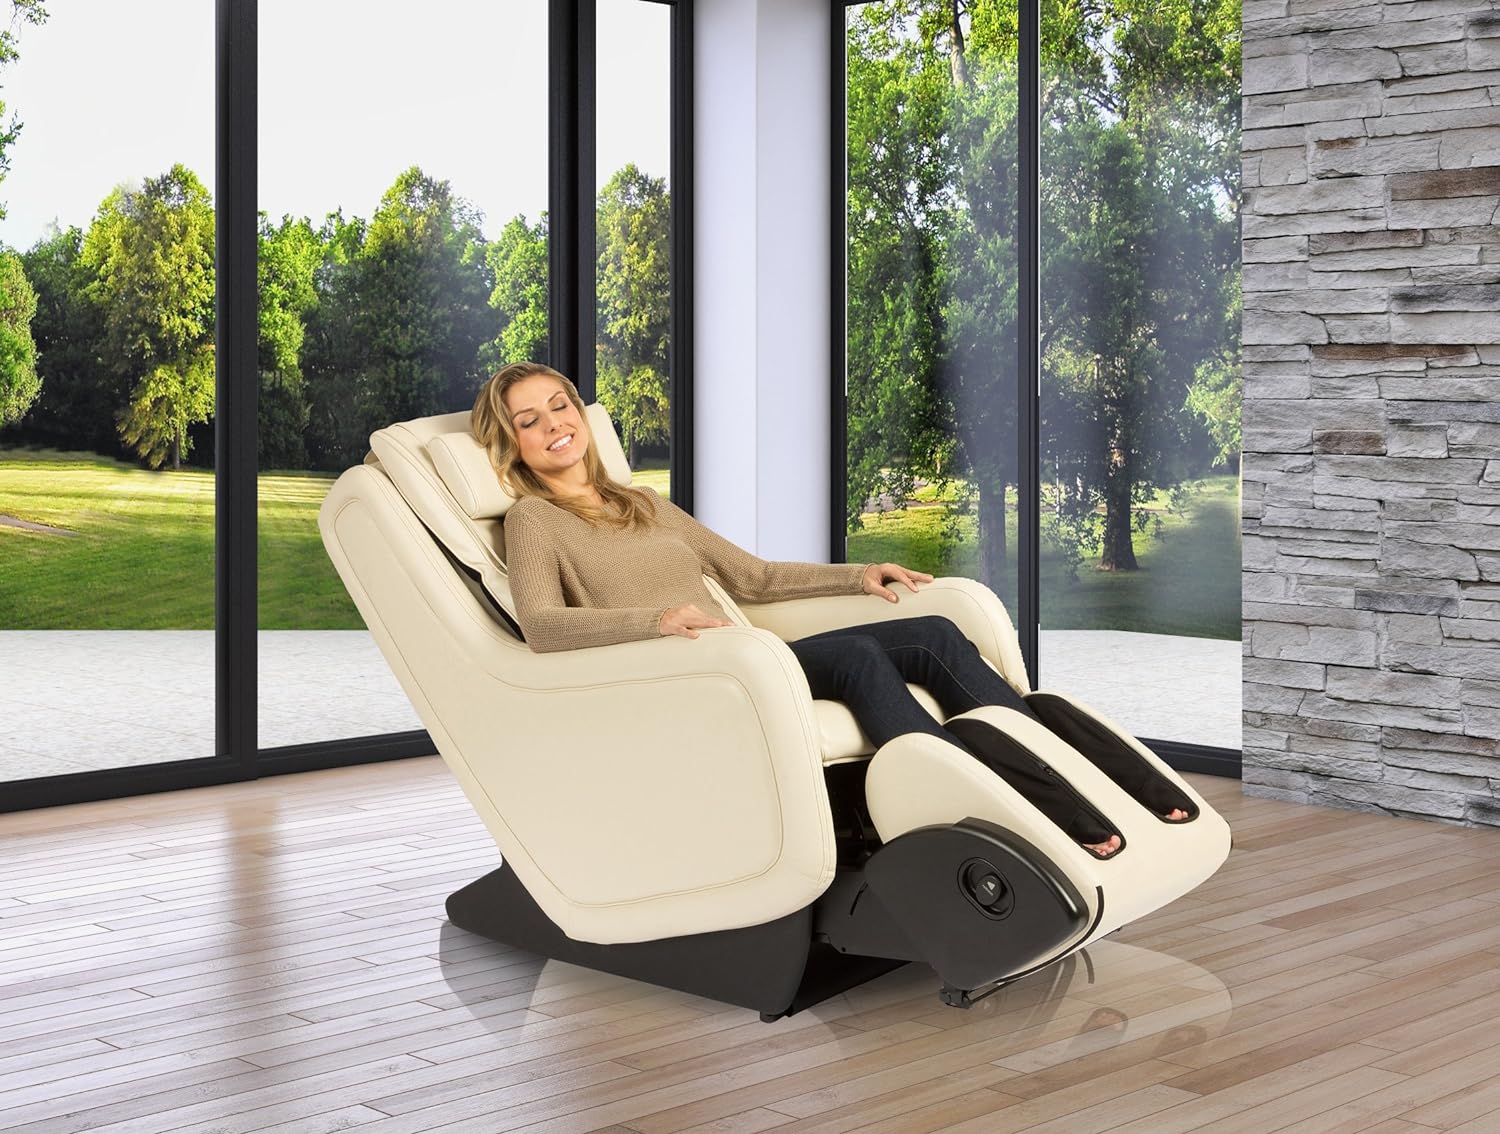 Are Portable Massage Chairs a Solution for Limited Space?